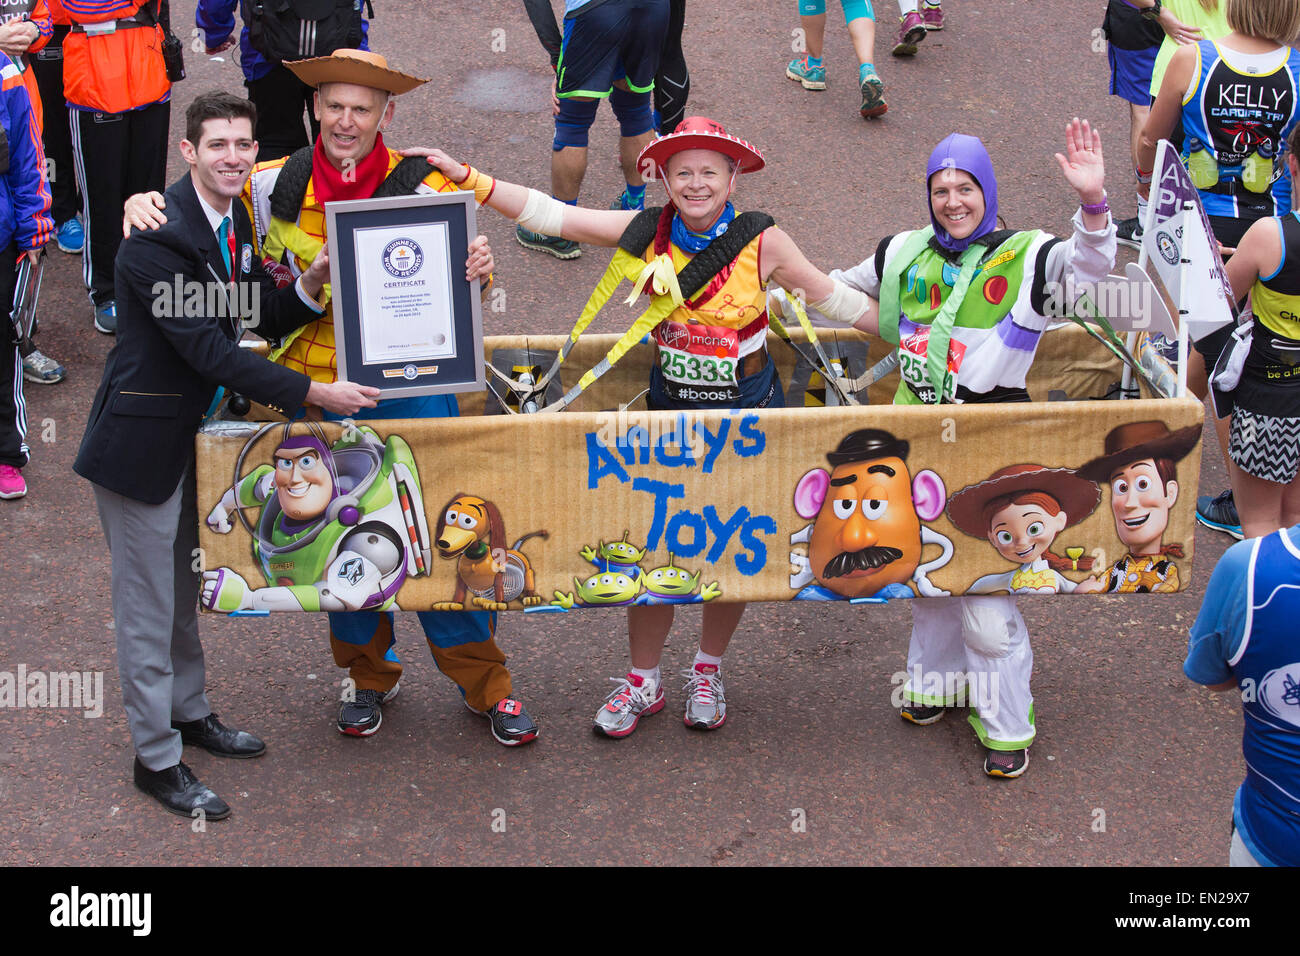 London, UK. 26 April 2015. Guinness World Records were achieved ...